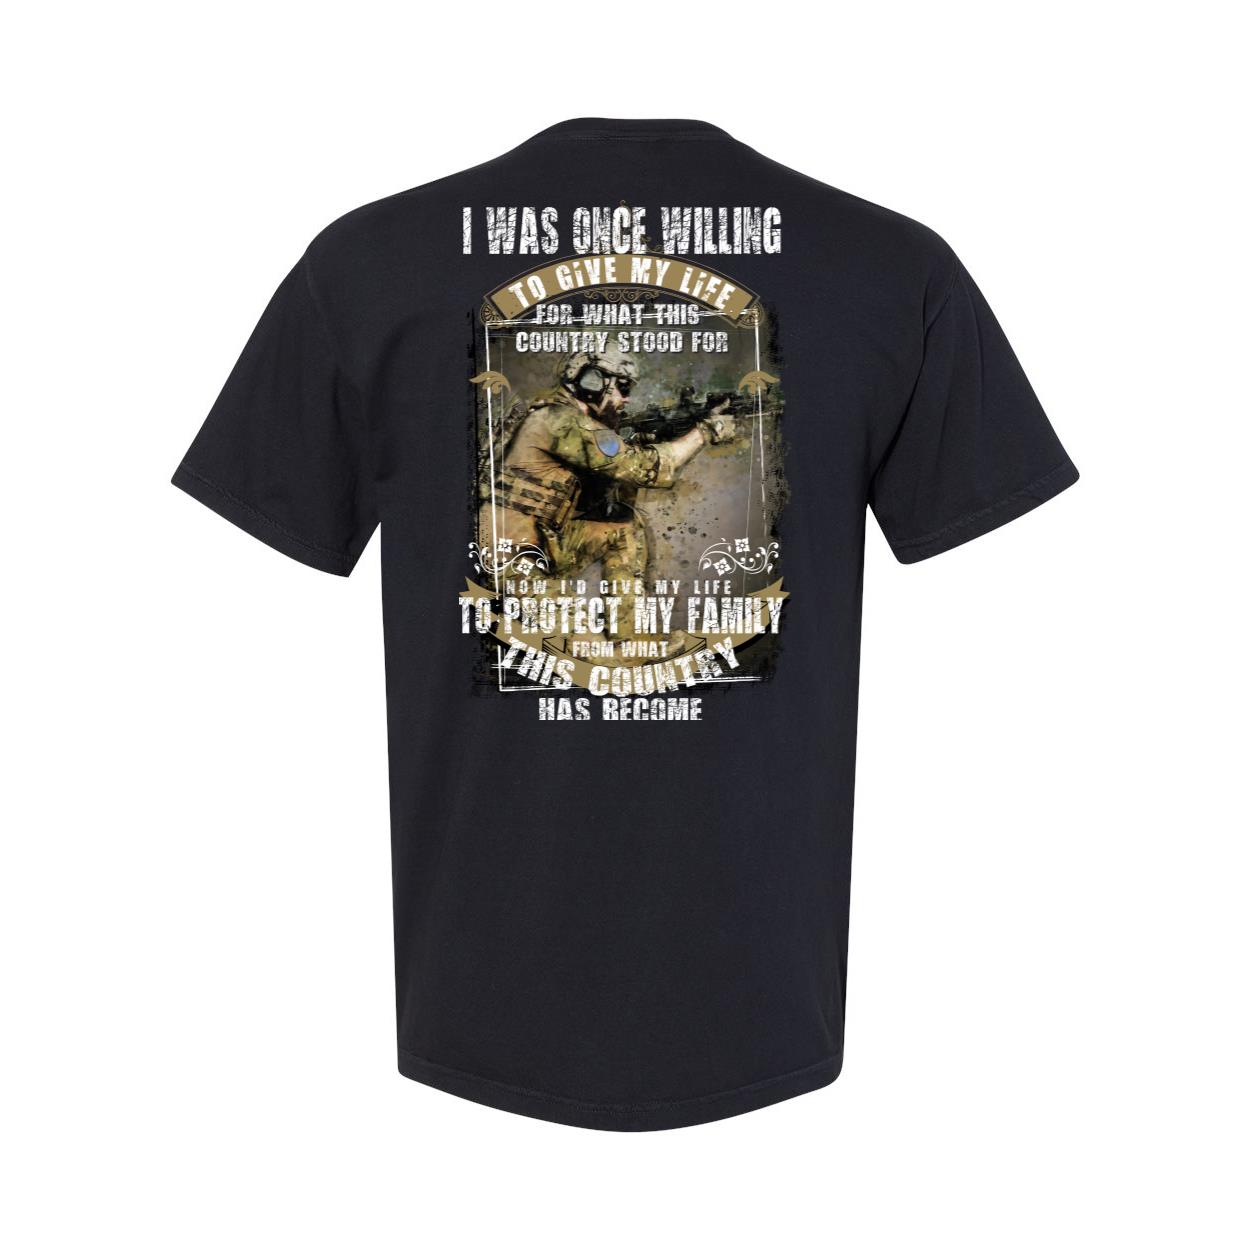 Veteran Shirt, Father's Day Shirt, I Was Once Willing To Give My Life For This Country T-Shirt KM2805